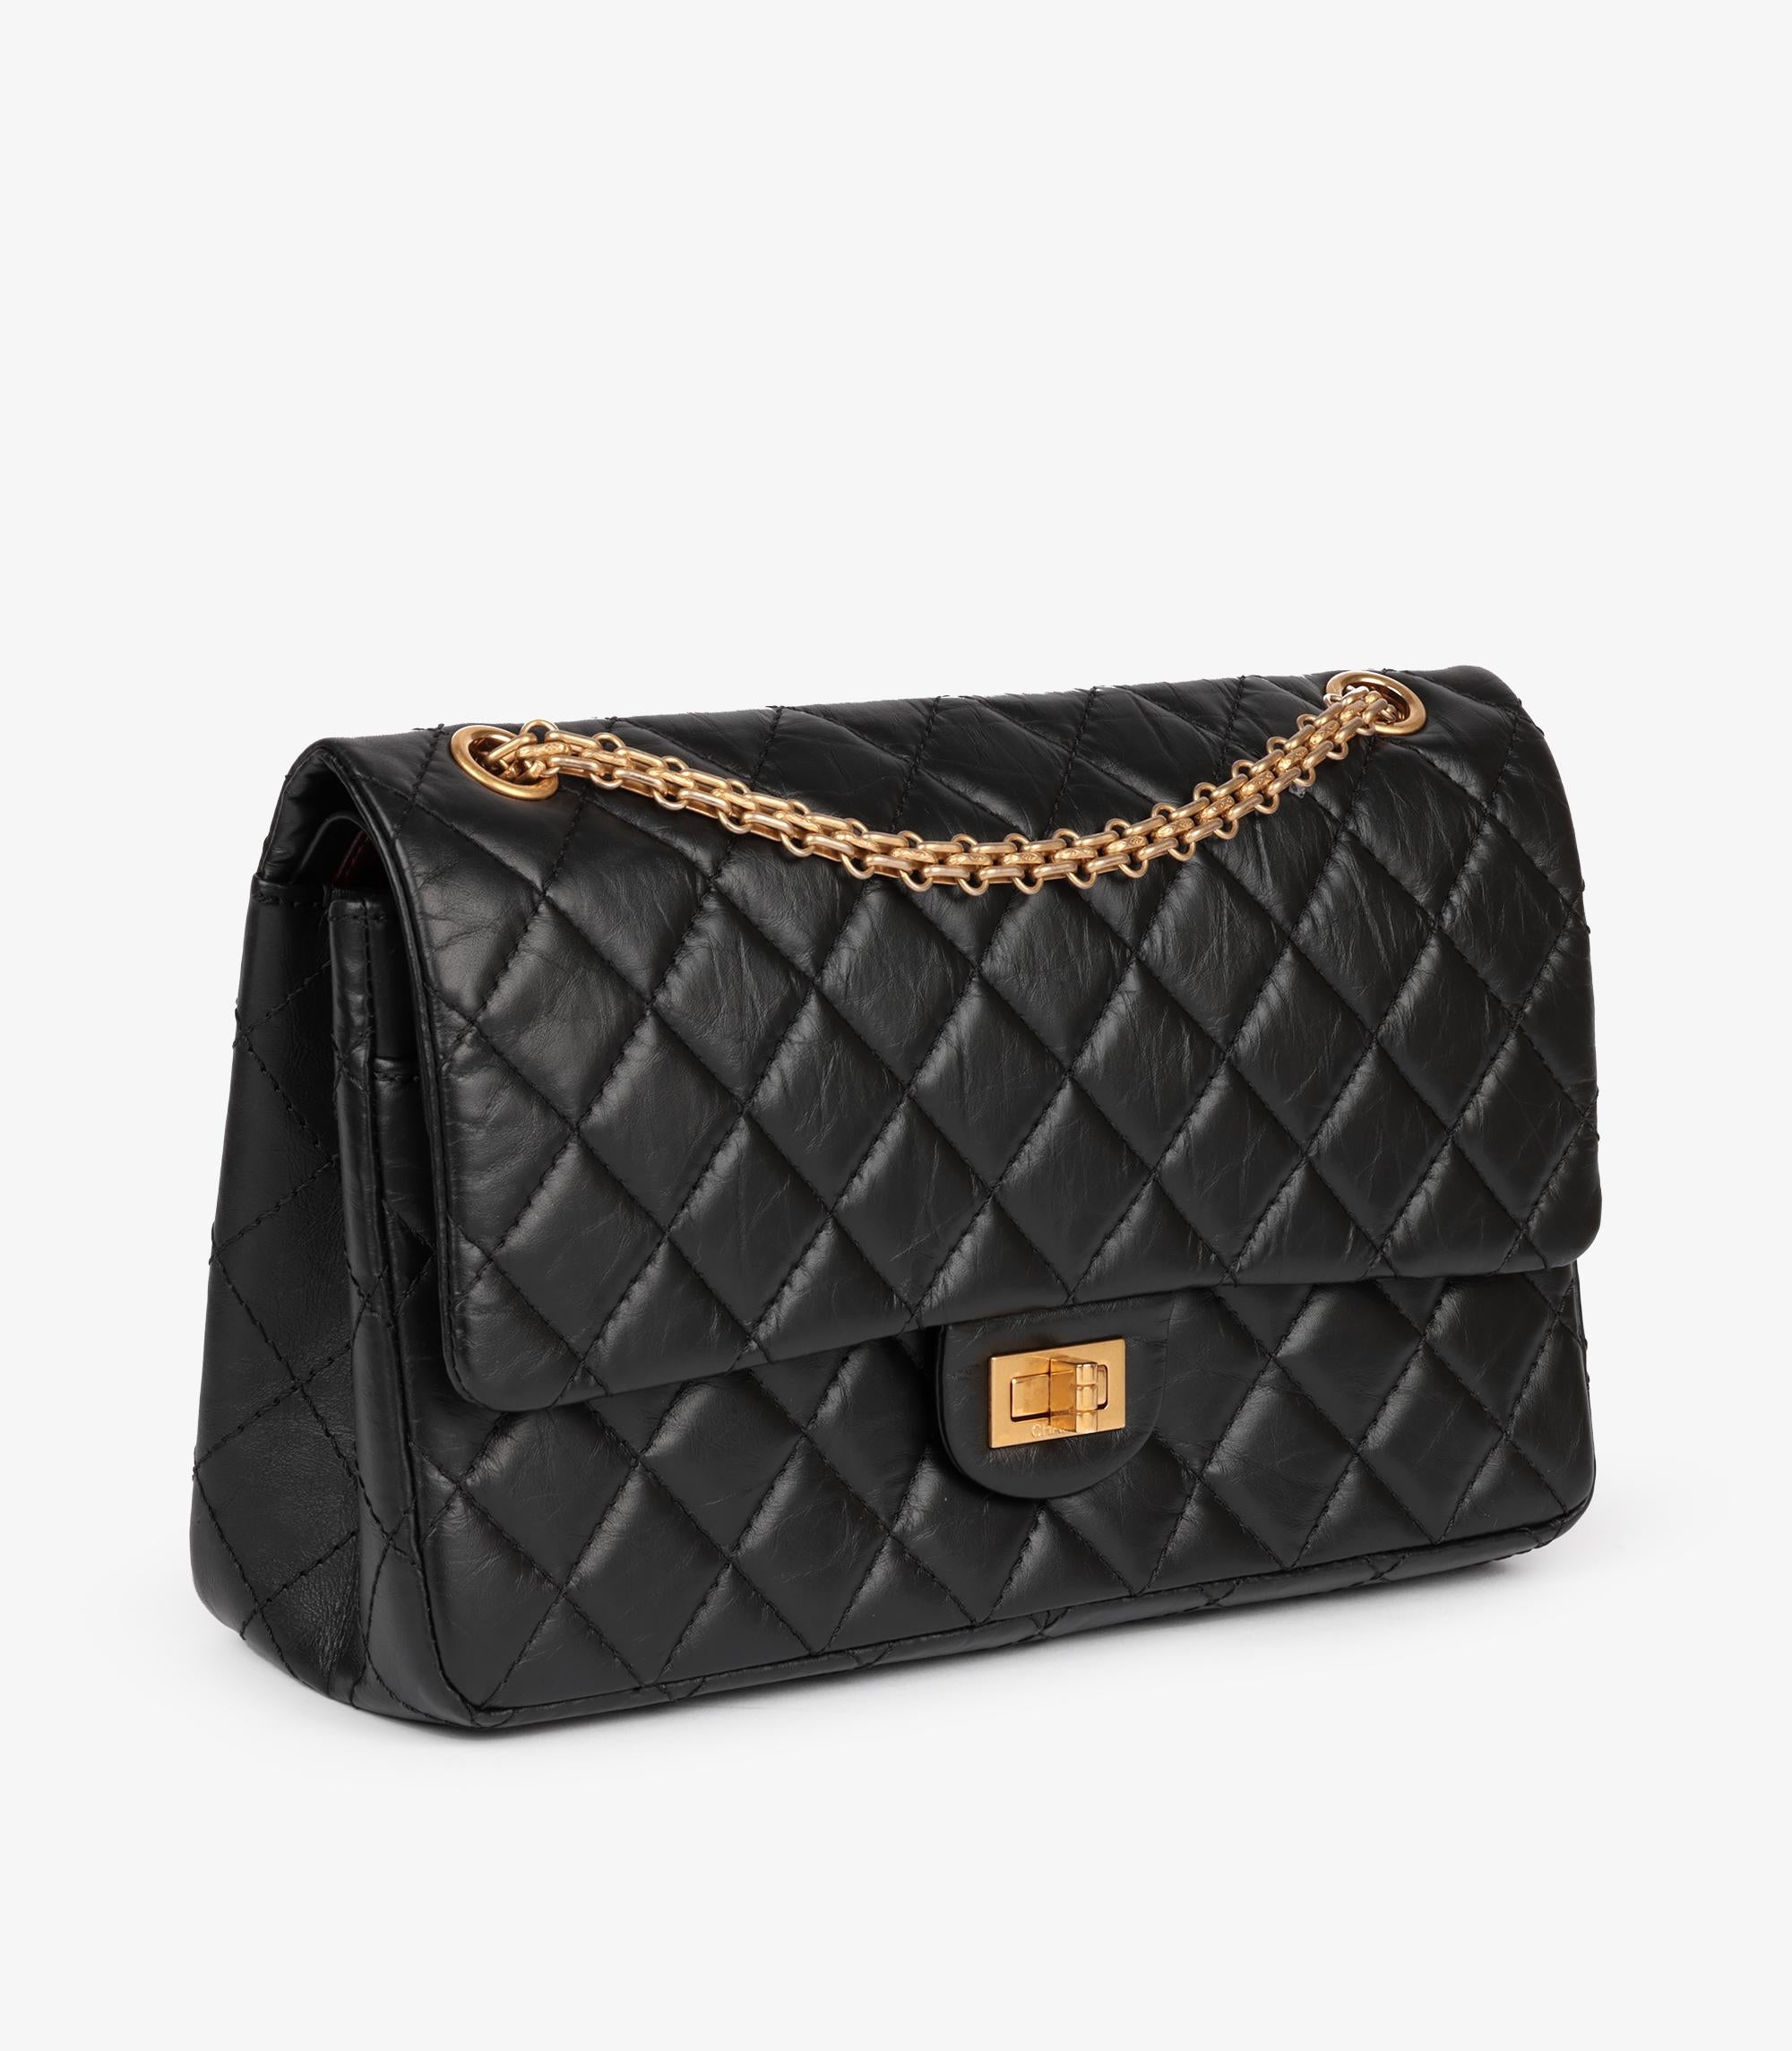 Chanel Black Quilted Crinkled Calfskin Leather 226 2.55 Reissue Double Flap Bag In Excellent Condition For Sale In Bishop's Stortford, Hertfordshire